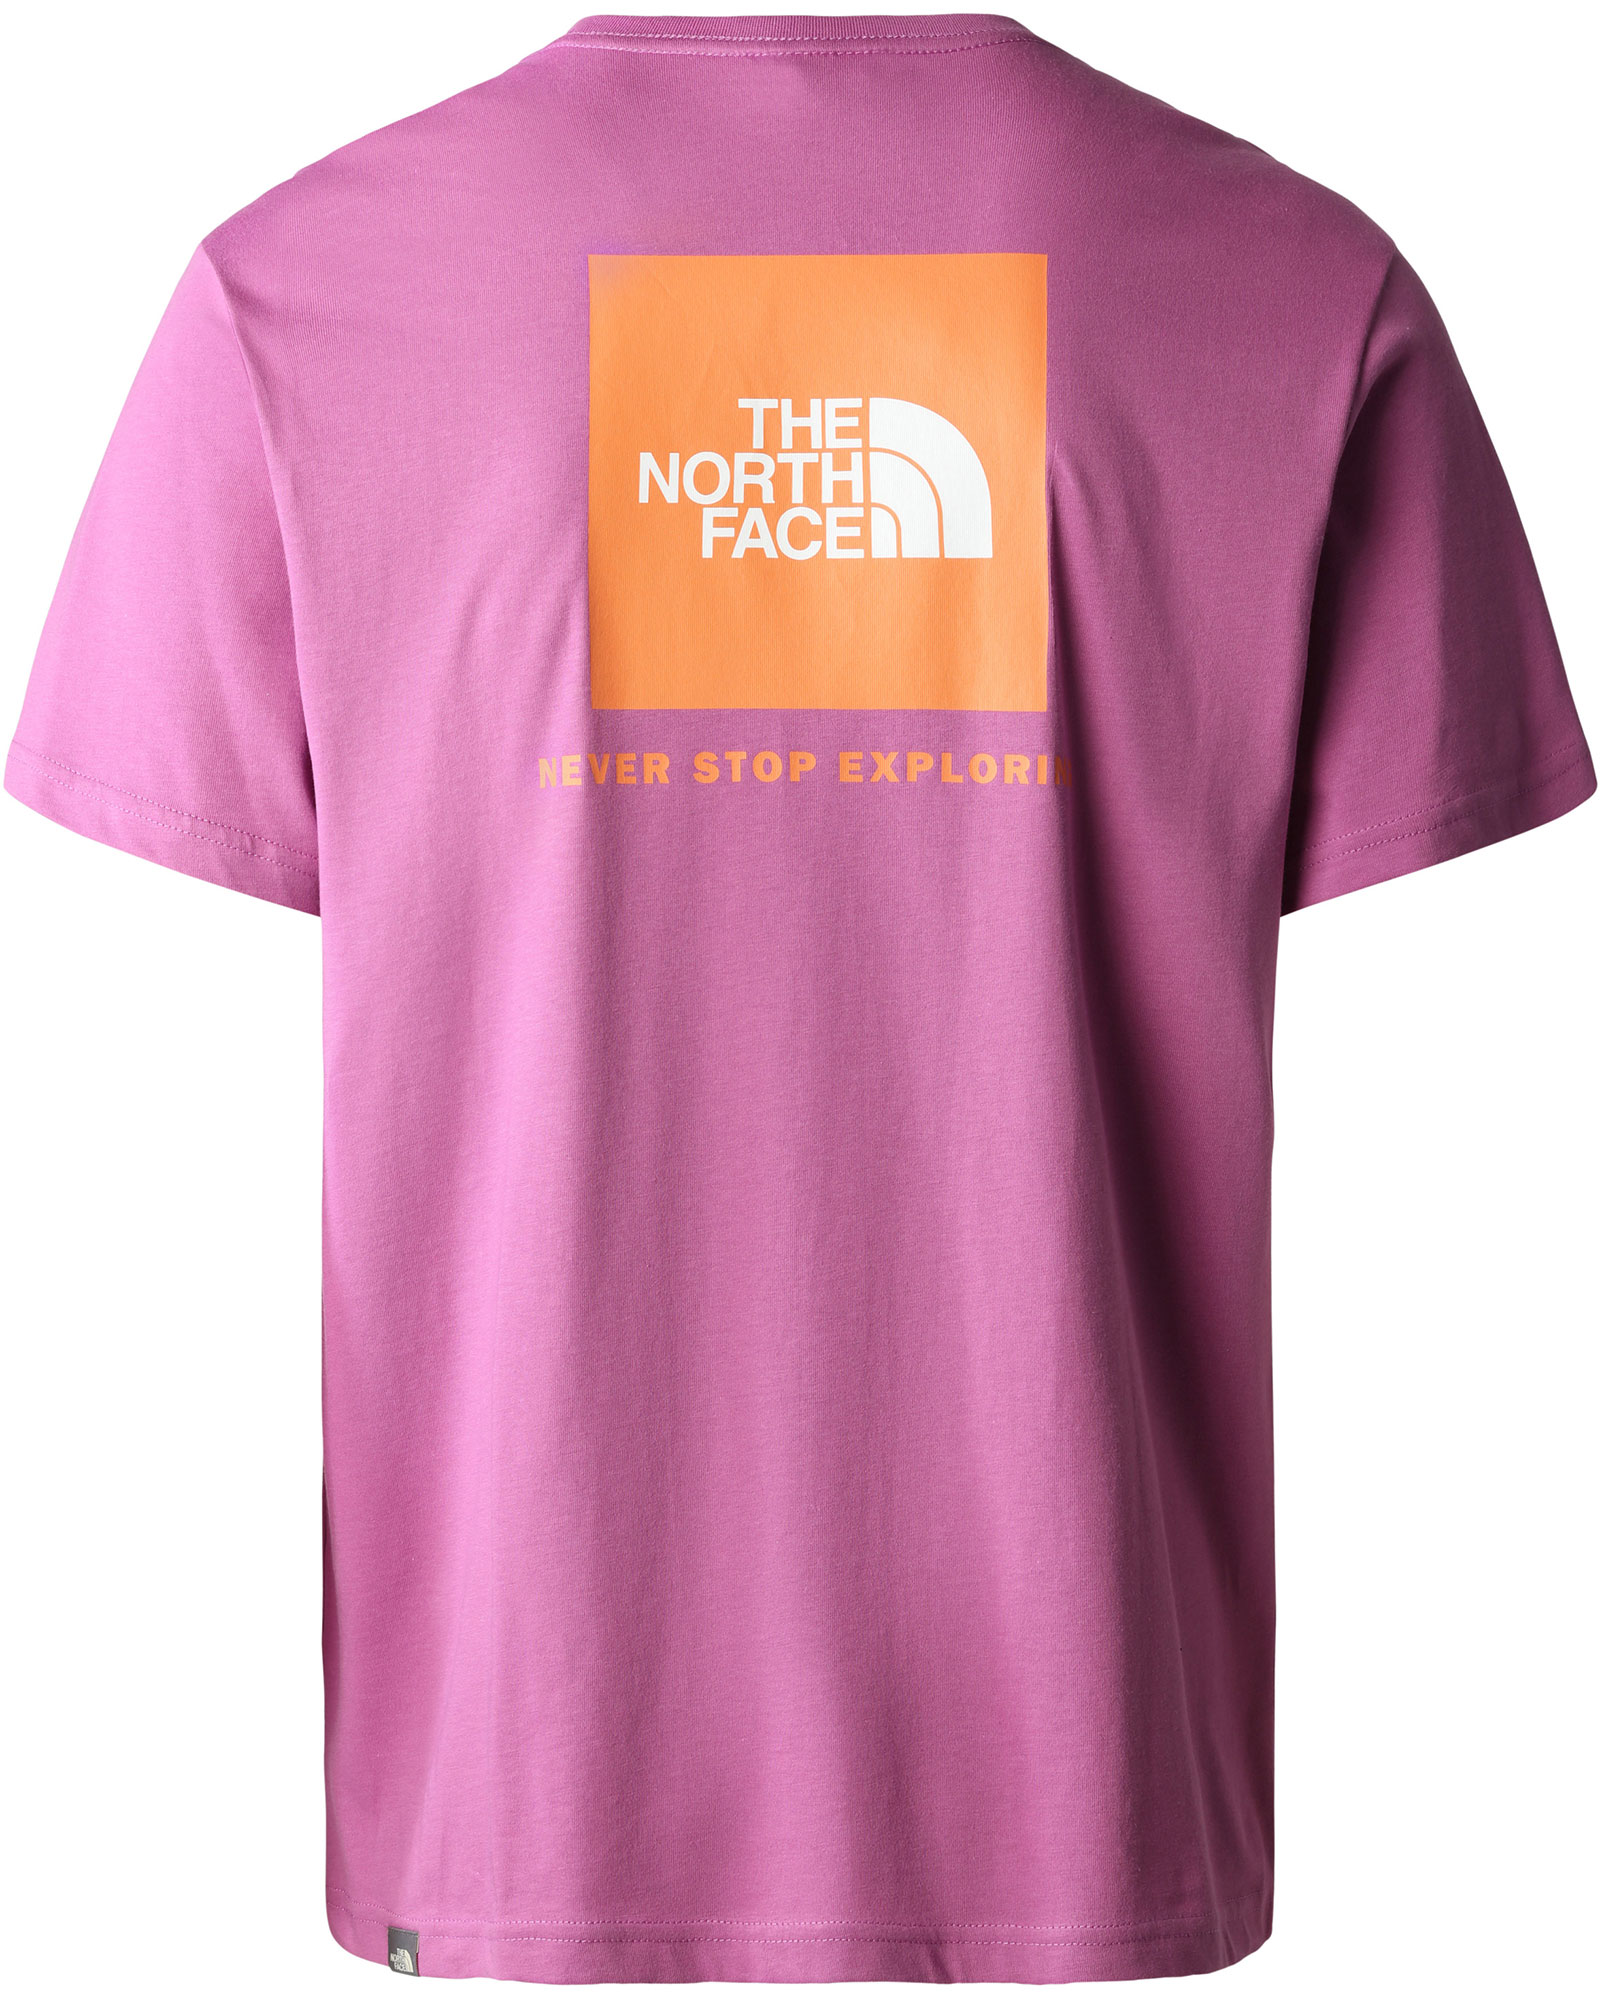 The North Face Red Box Men’s T Shirt - Purple Cactus Flower XL